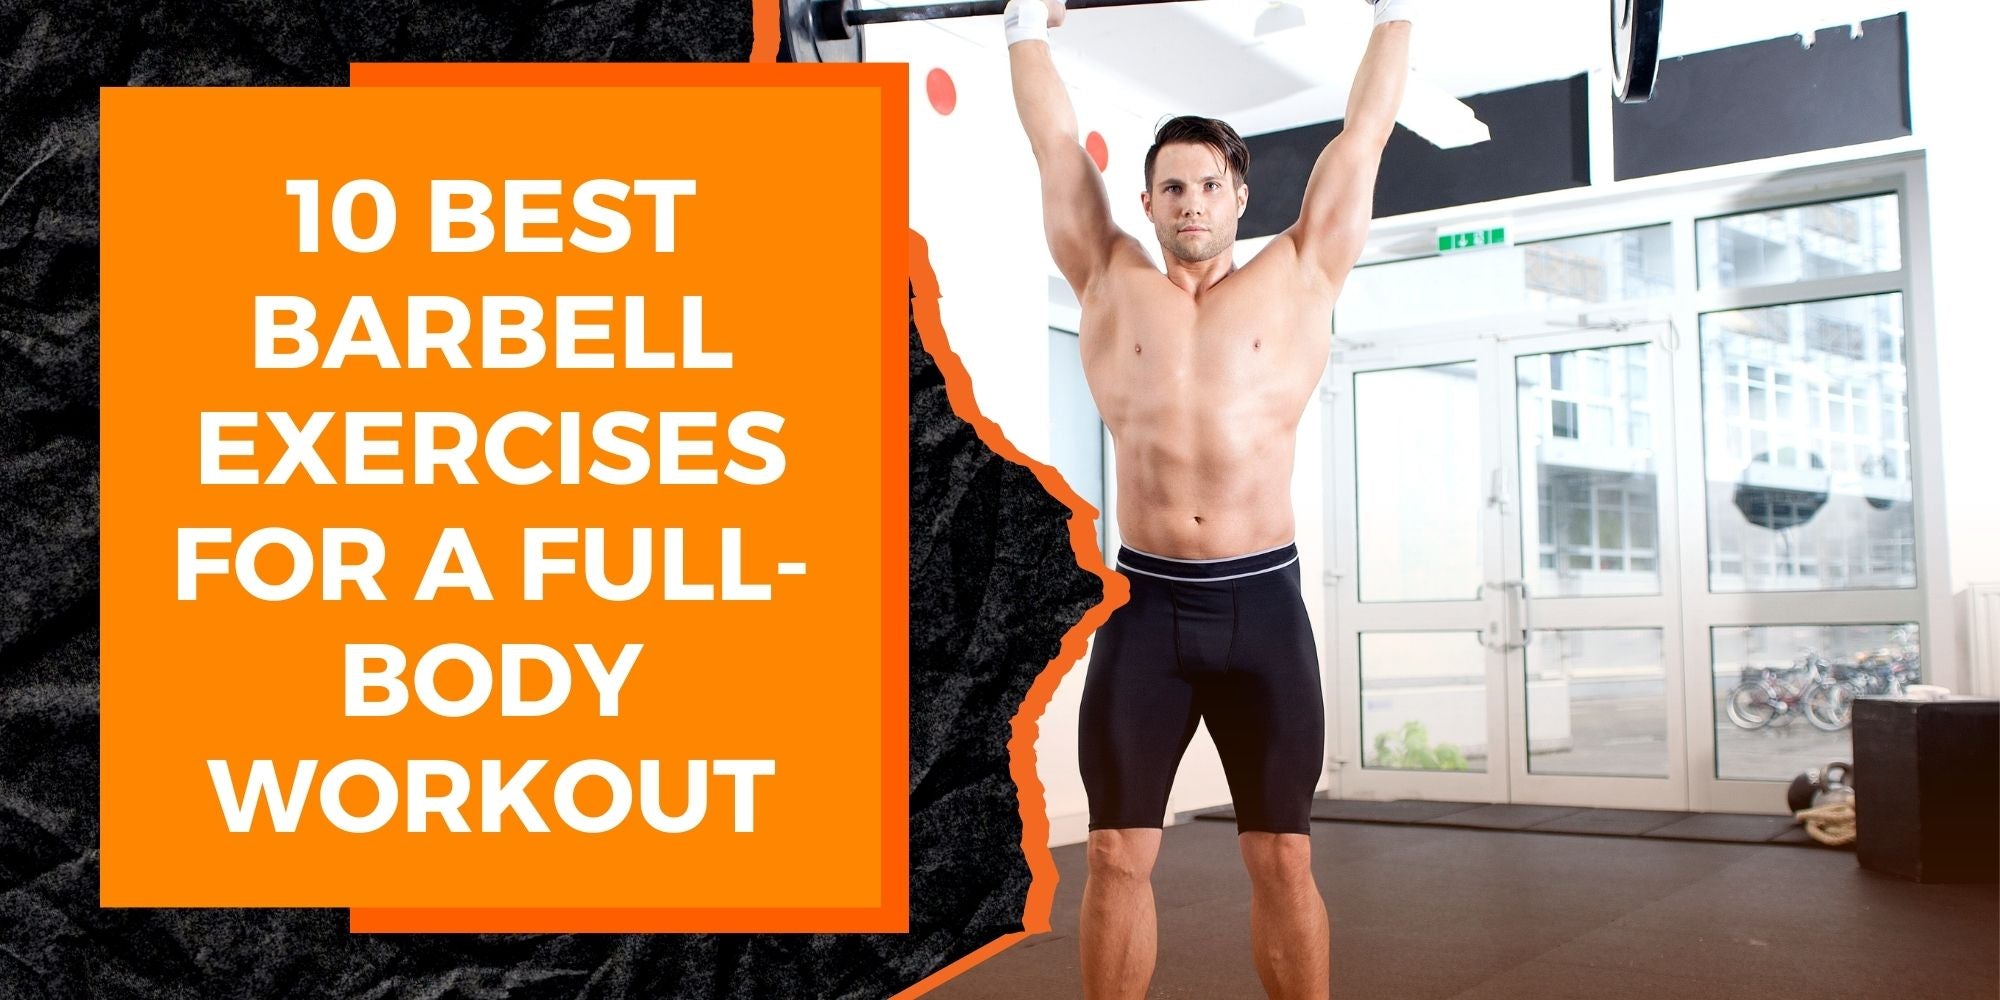 10 Best Barbell Exercises for a Full-Body Workout